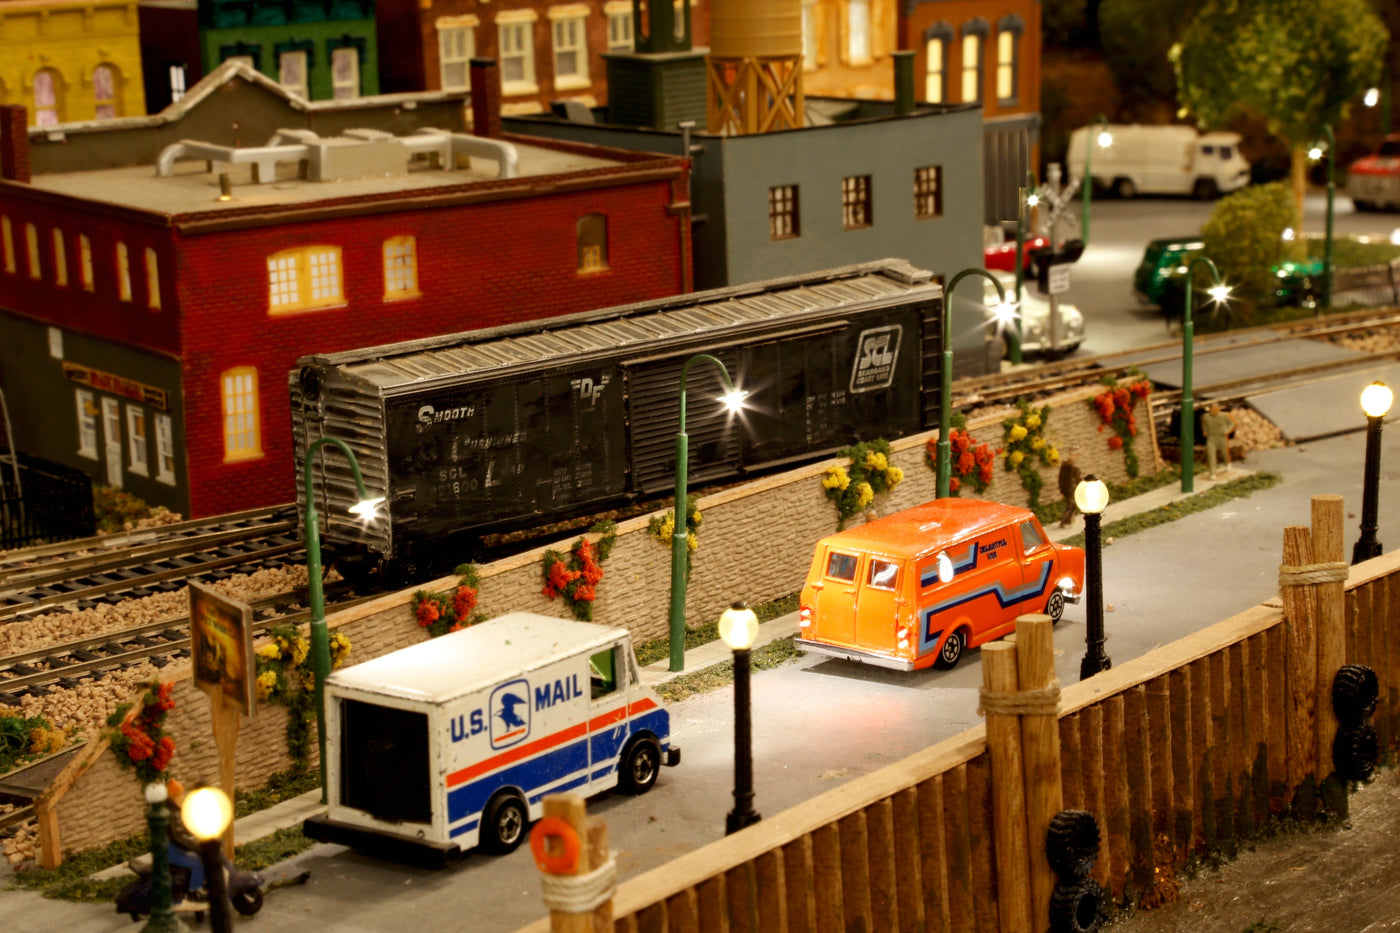 Lighting train layout with Gooseneck and Globe lamps